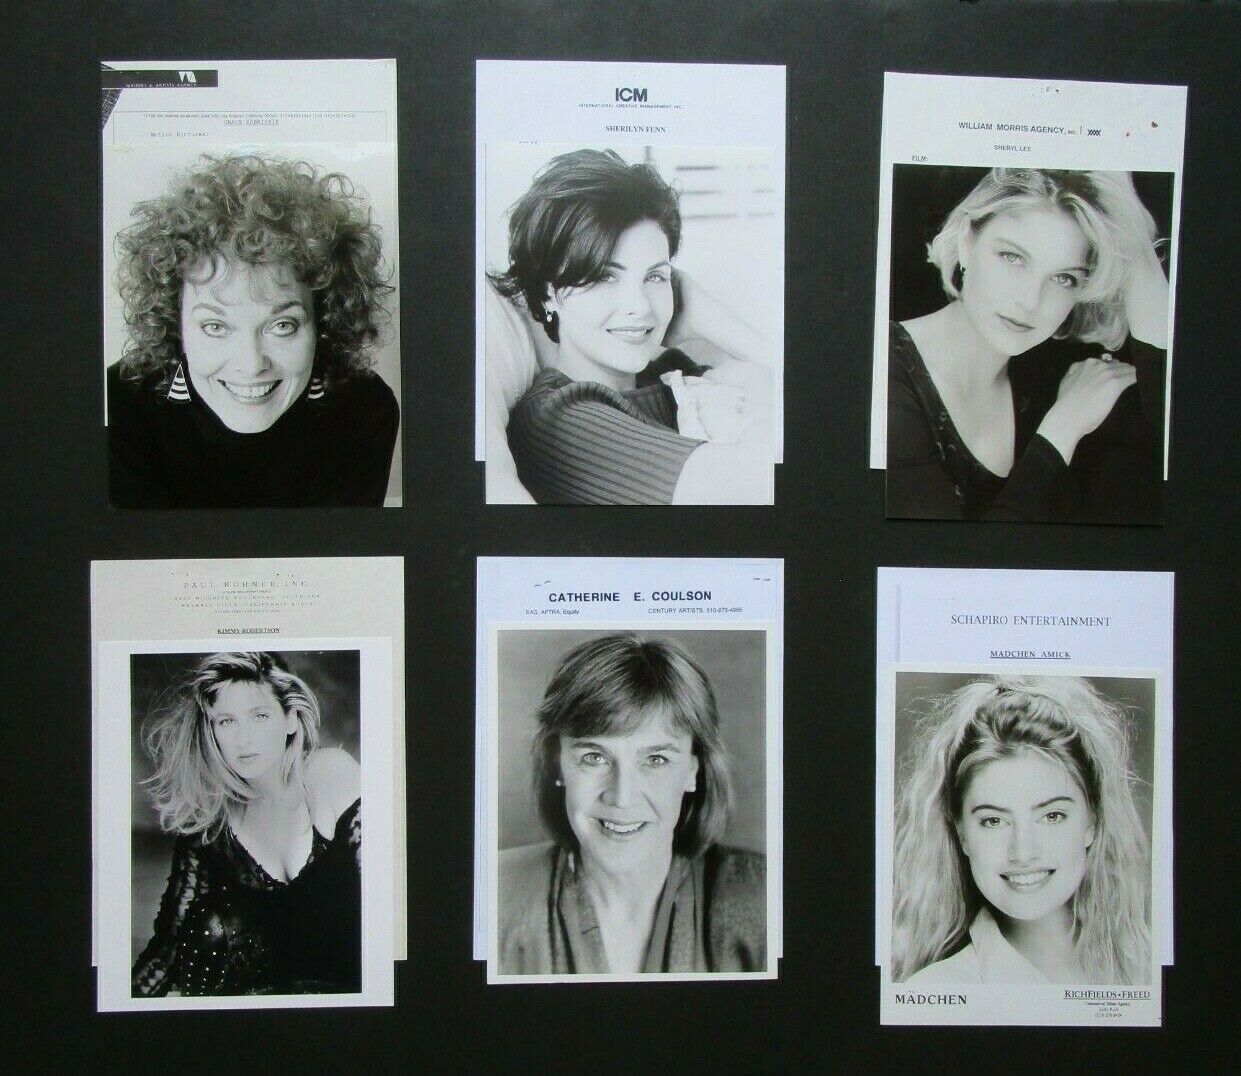 WOMAN OF TWIN PEAKS AGENCY PRESS PHOTO AND RESUME